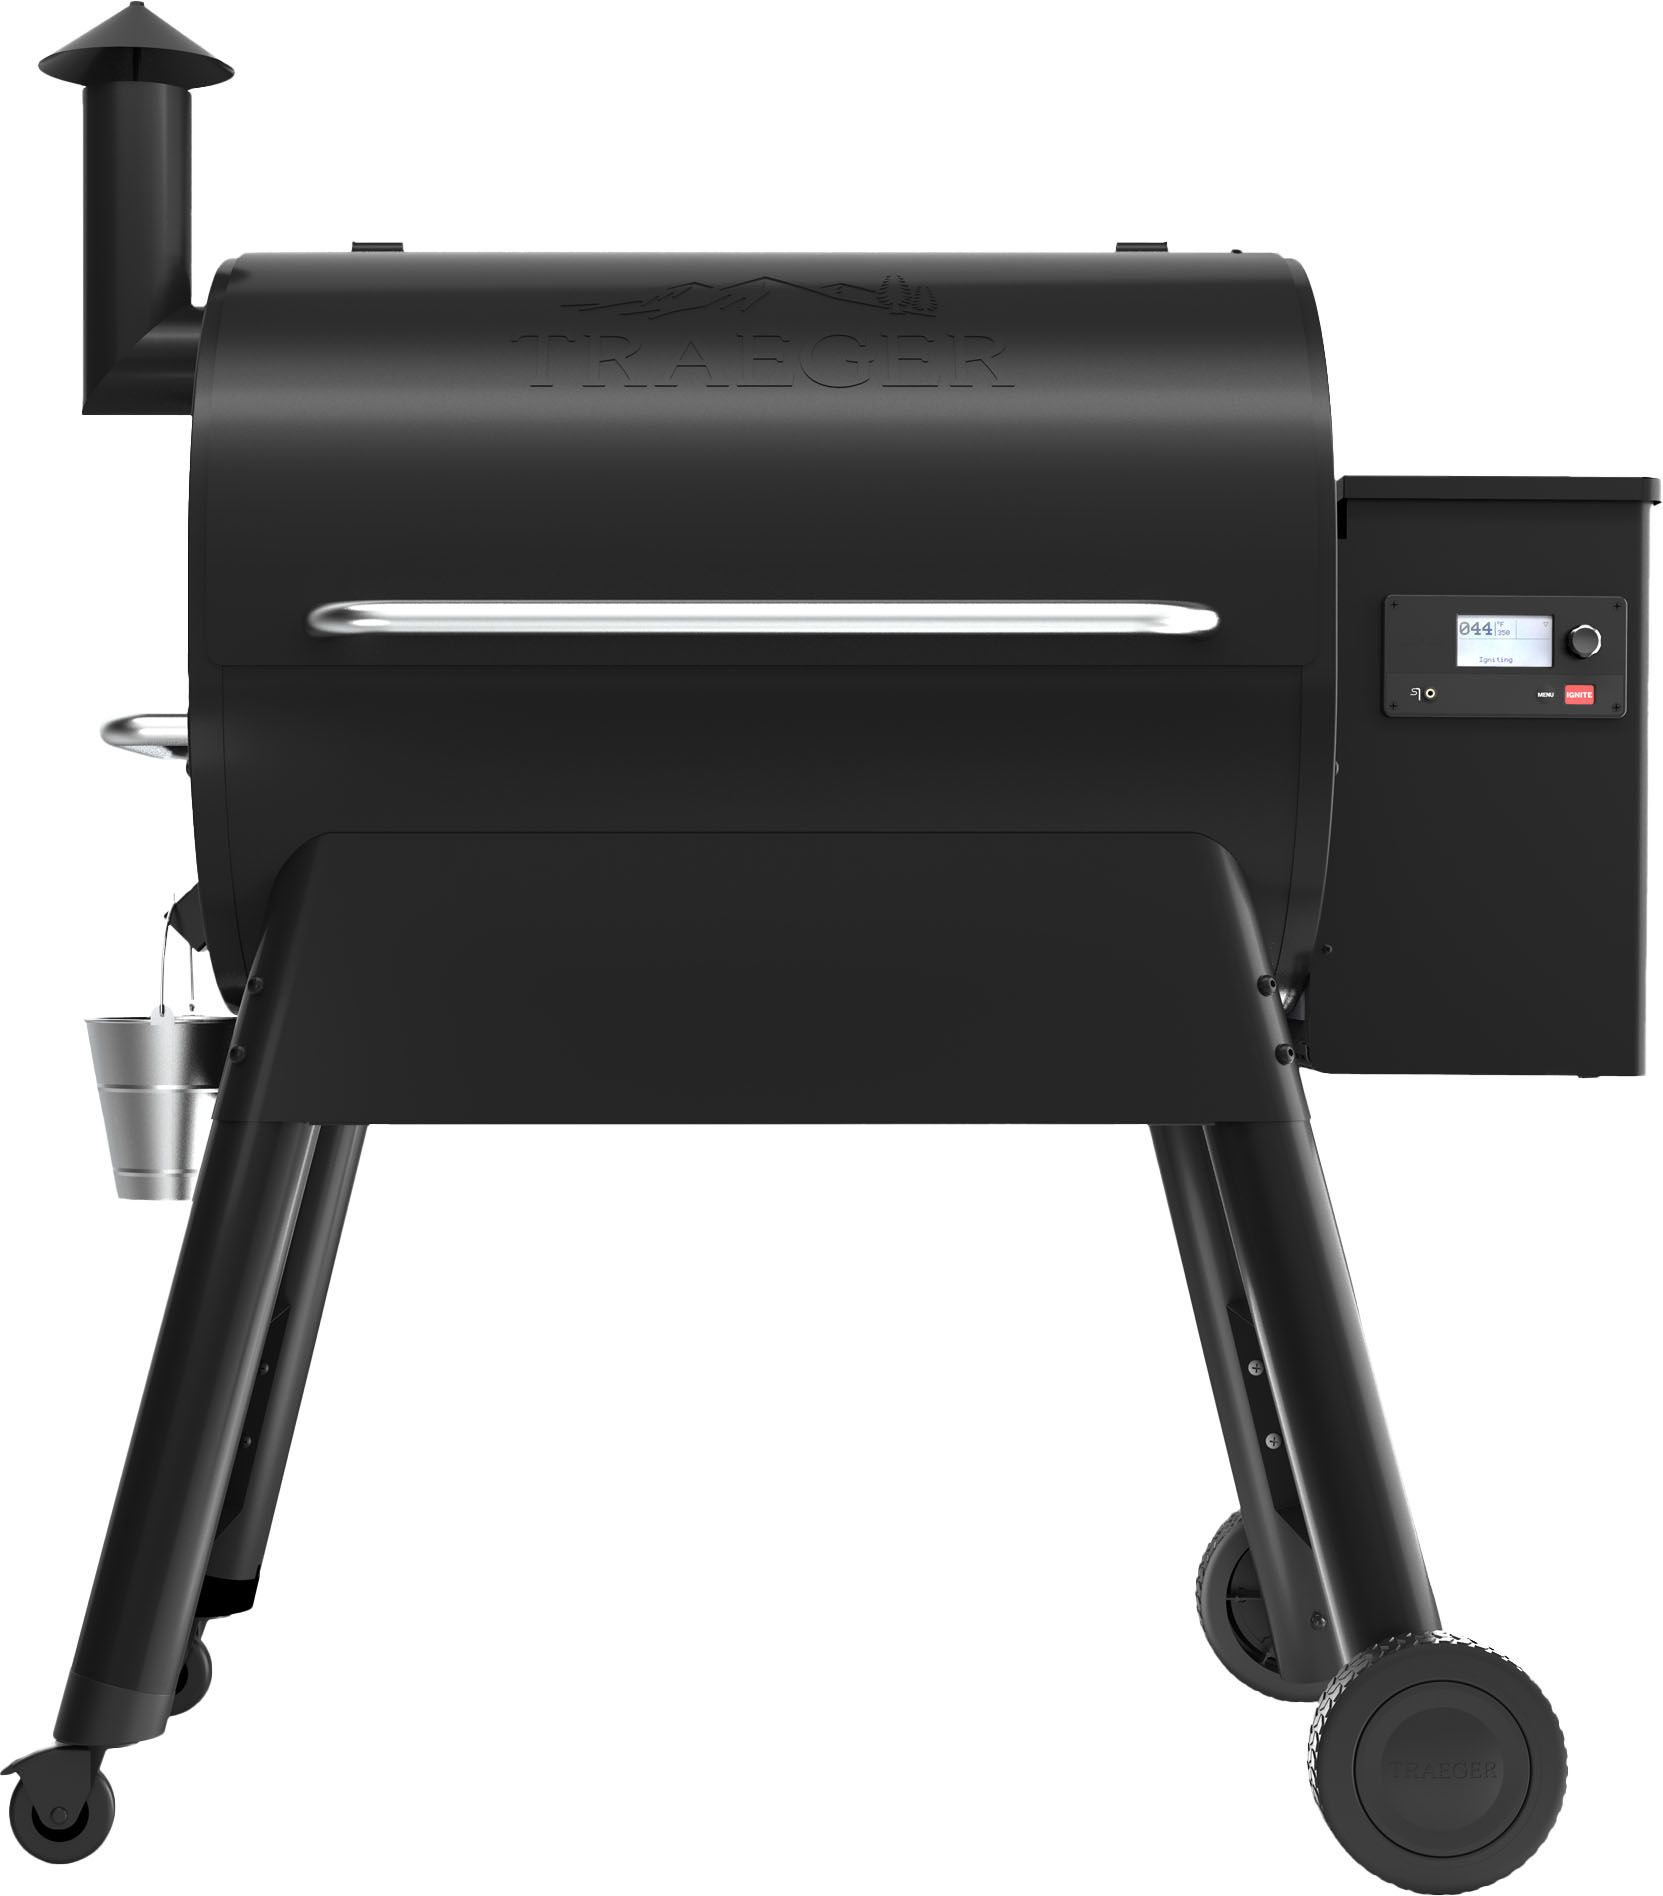 Traeger Grills Pro 780 Pellet Grill and Smoker with WiFIRE Black TFB78GLE - Best Buy | Best Buy U.S.